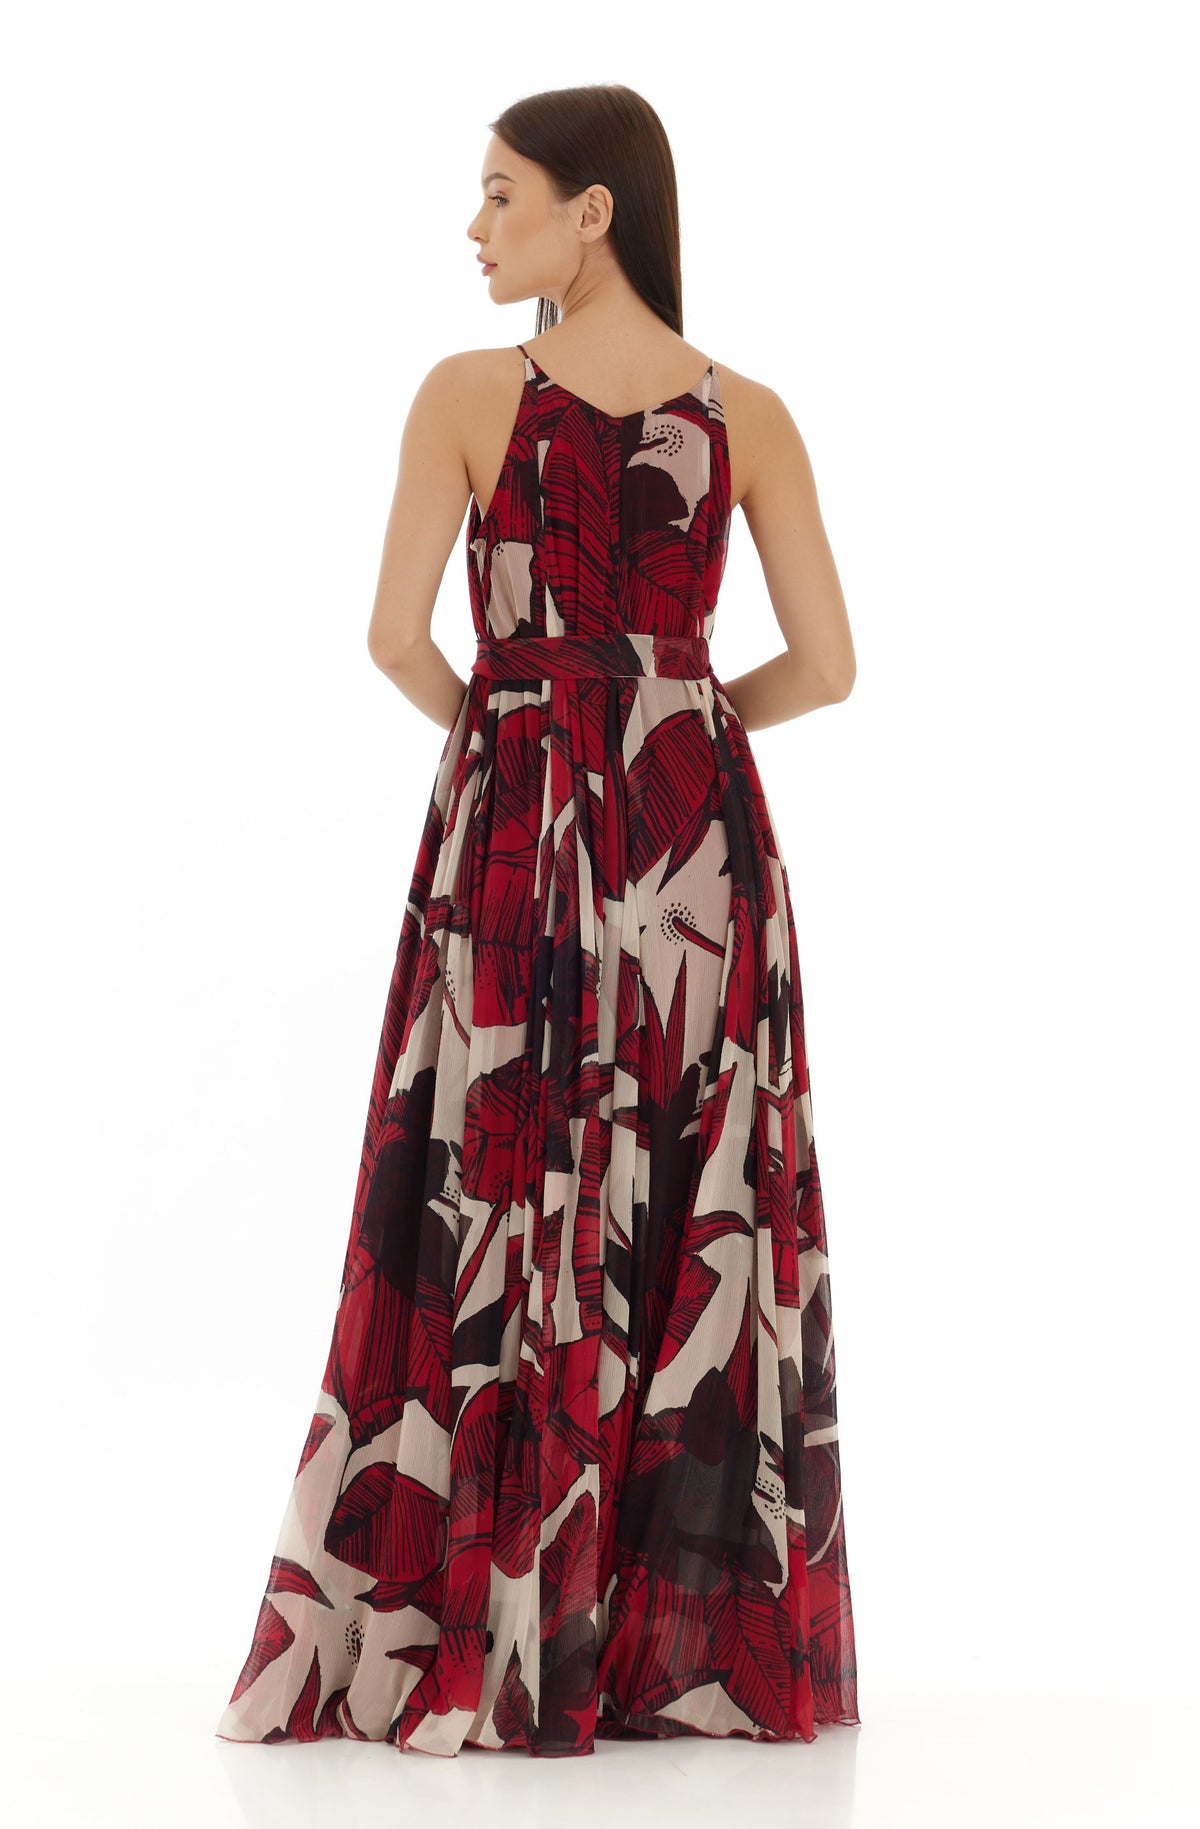 OFF WHITE & RED FLORAL LONG DRESS